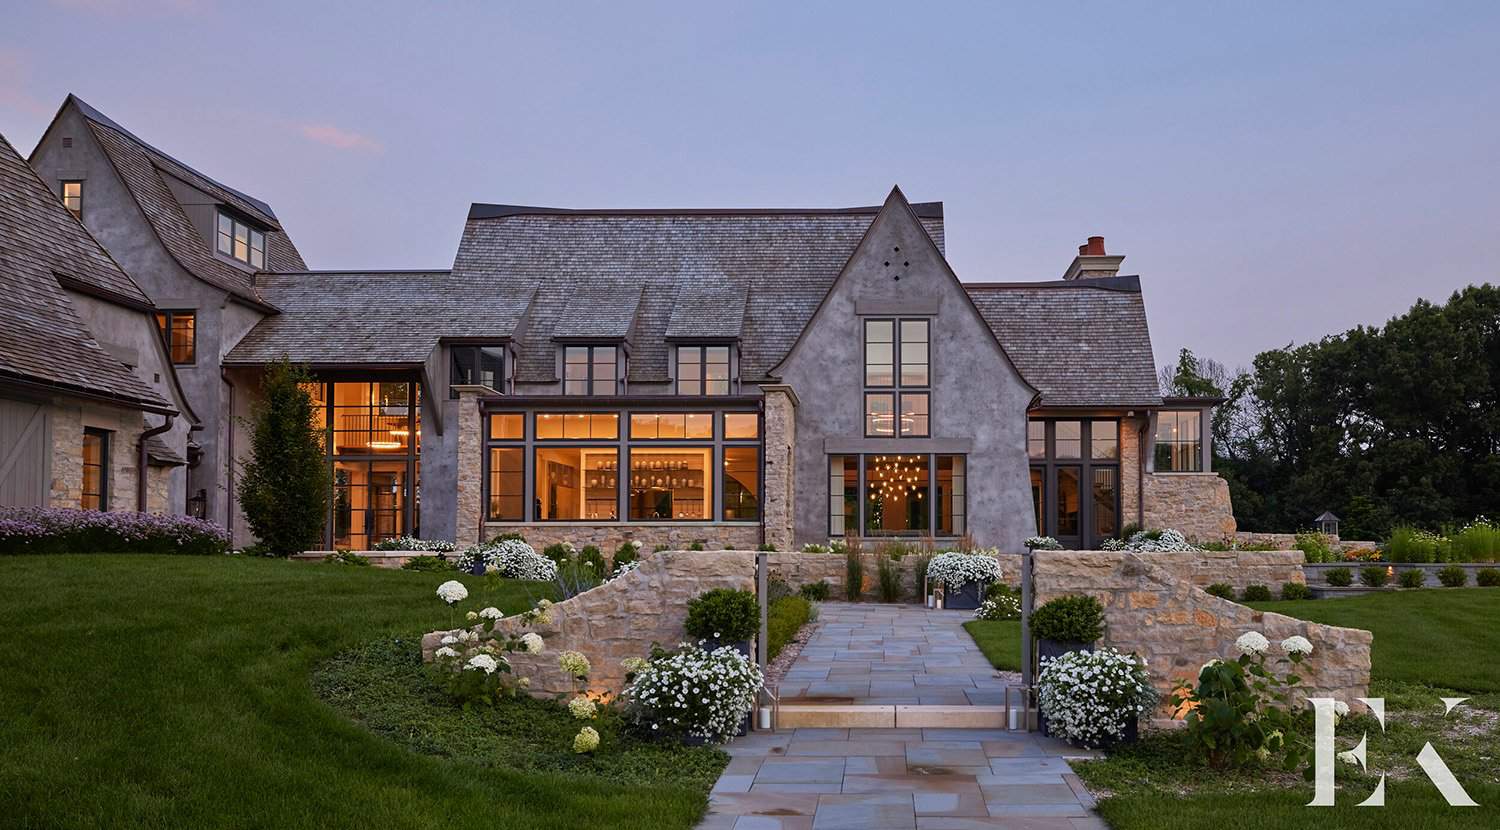 Modern farmhouse estate in Michigan has the most dreamy living spaces